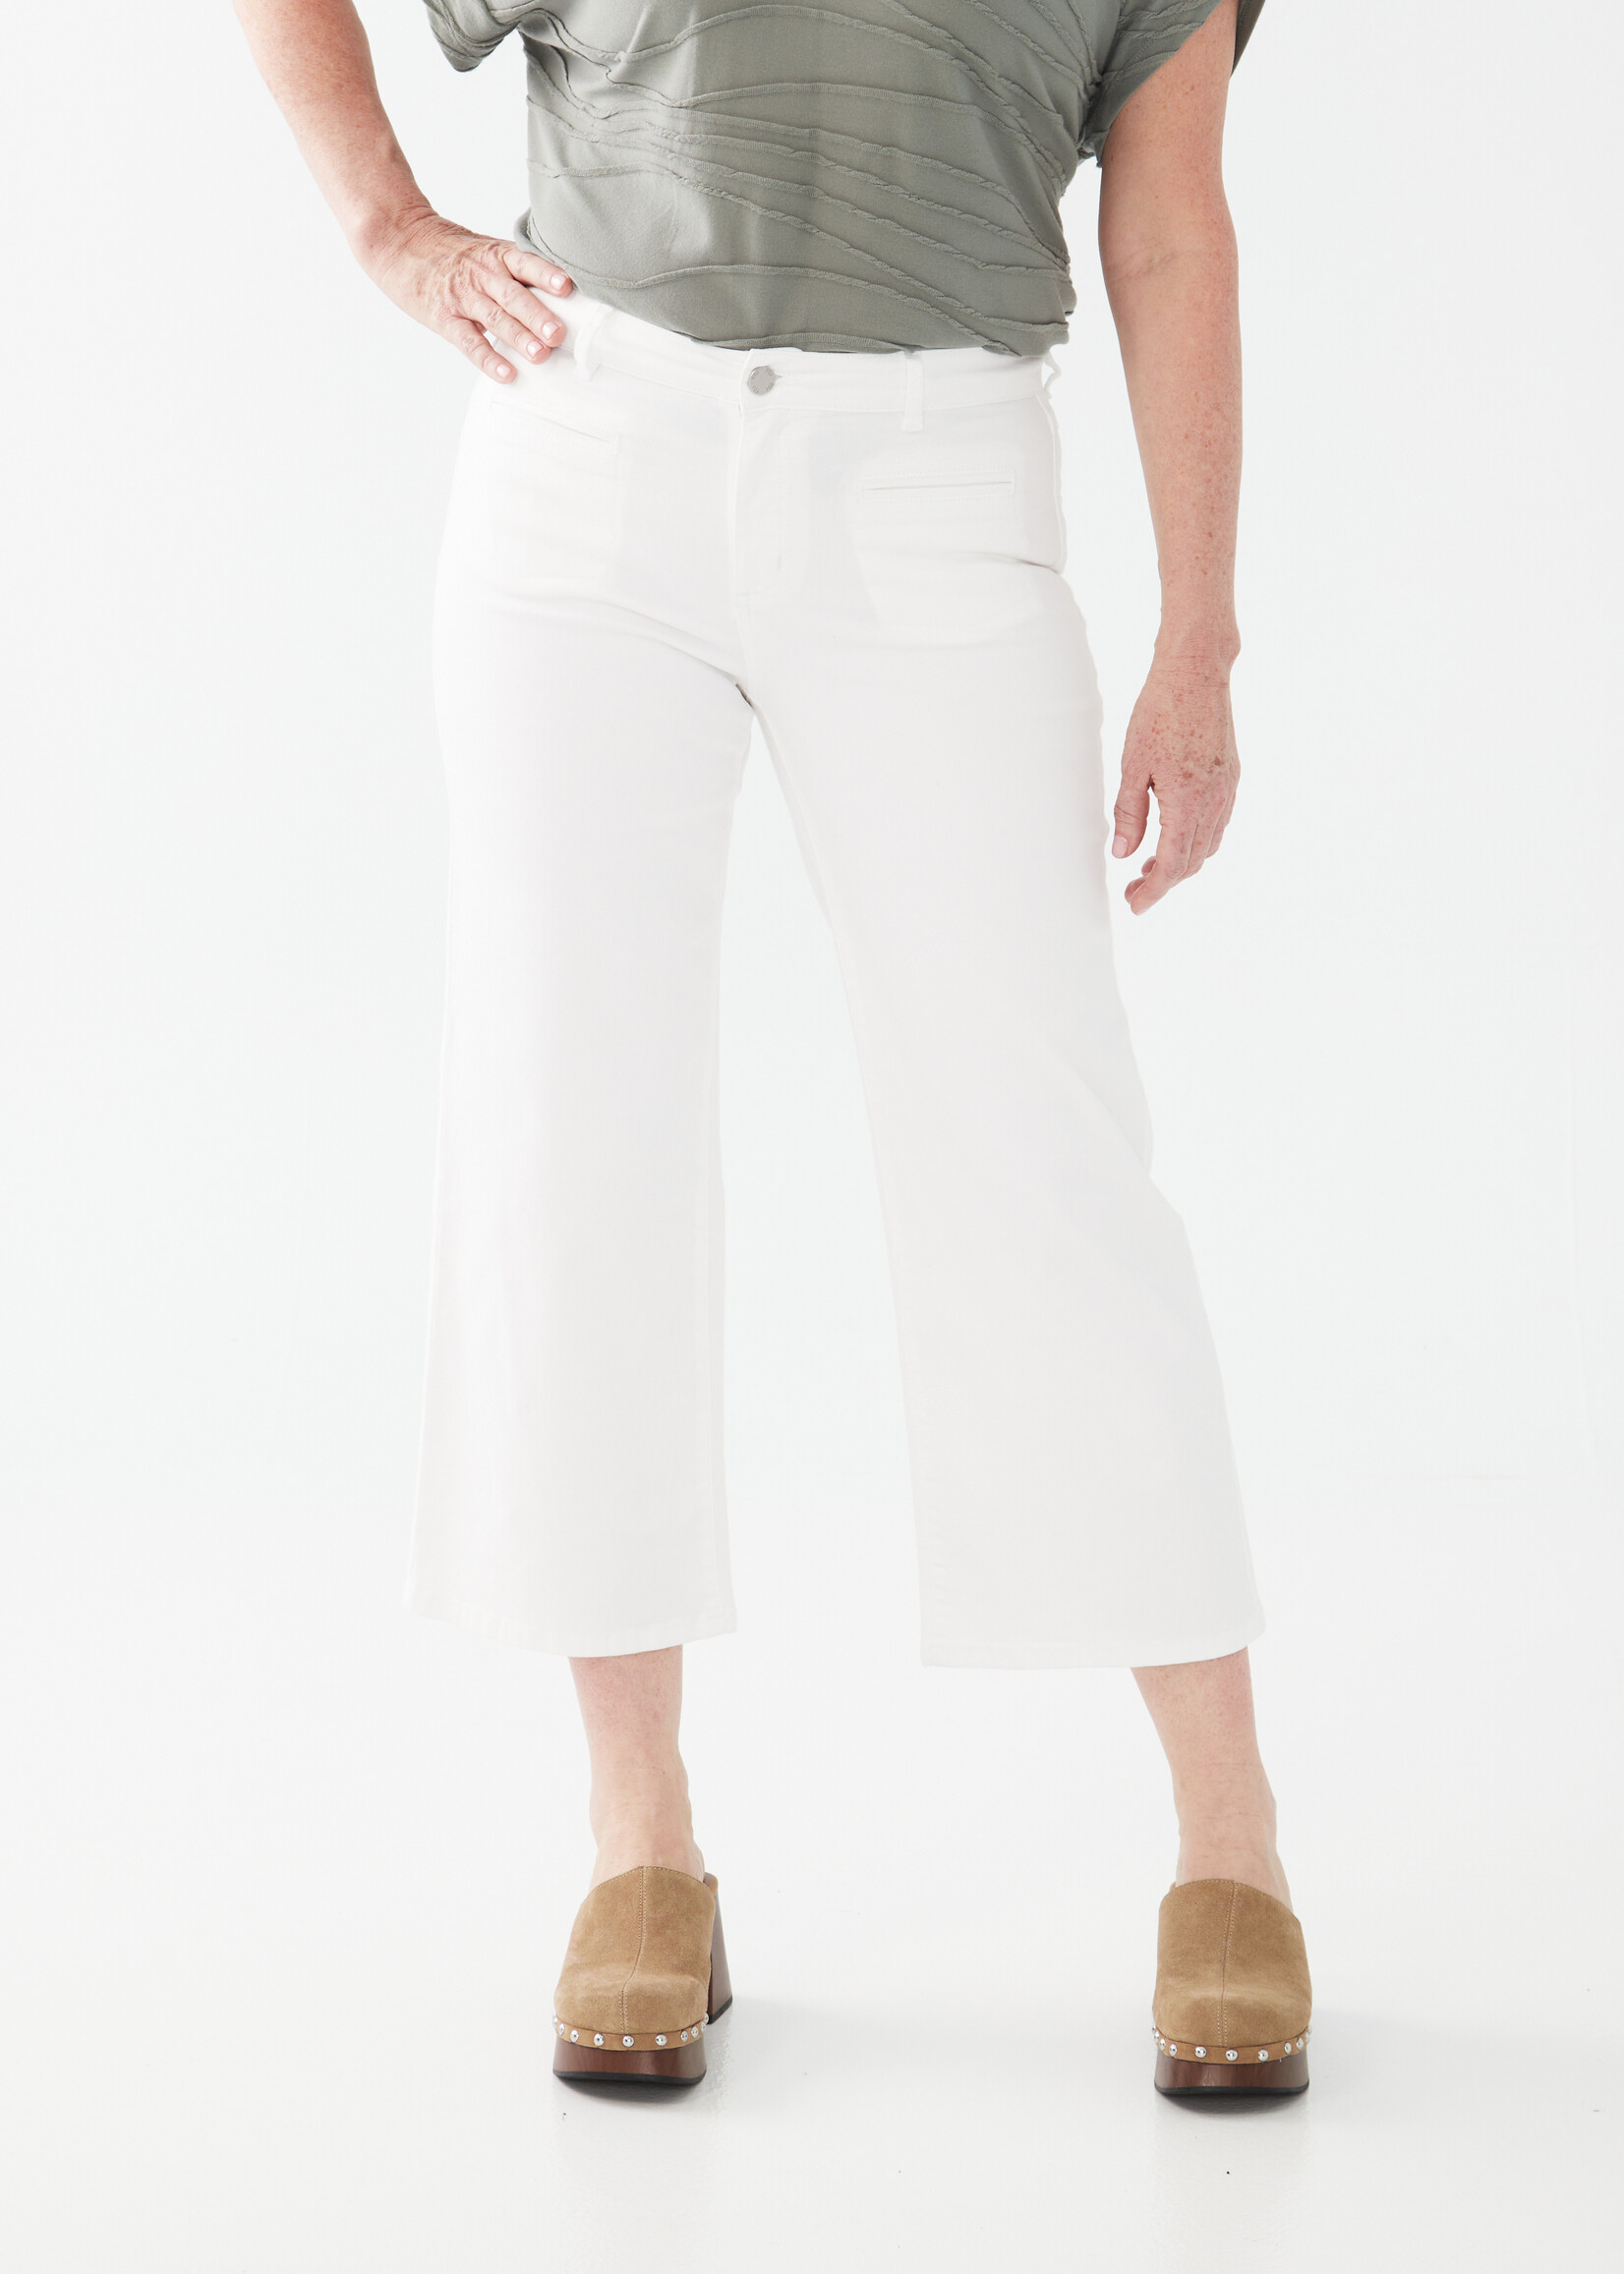 French Dressing Jeans FDJ Olivia Wide Leg Crop Pant